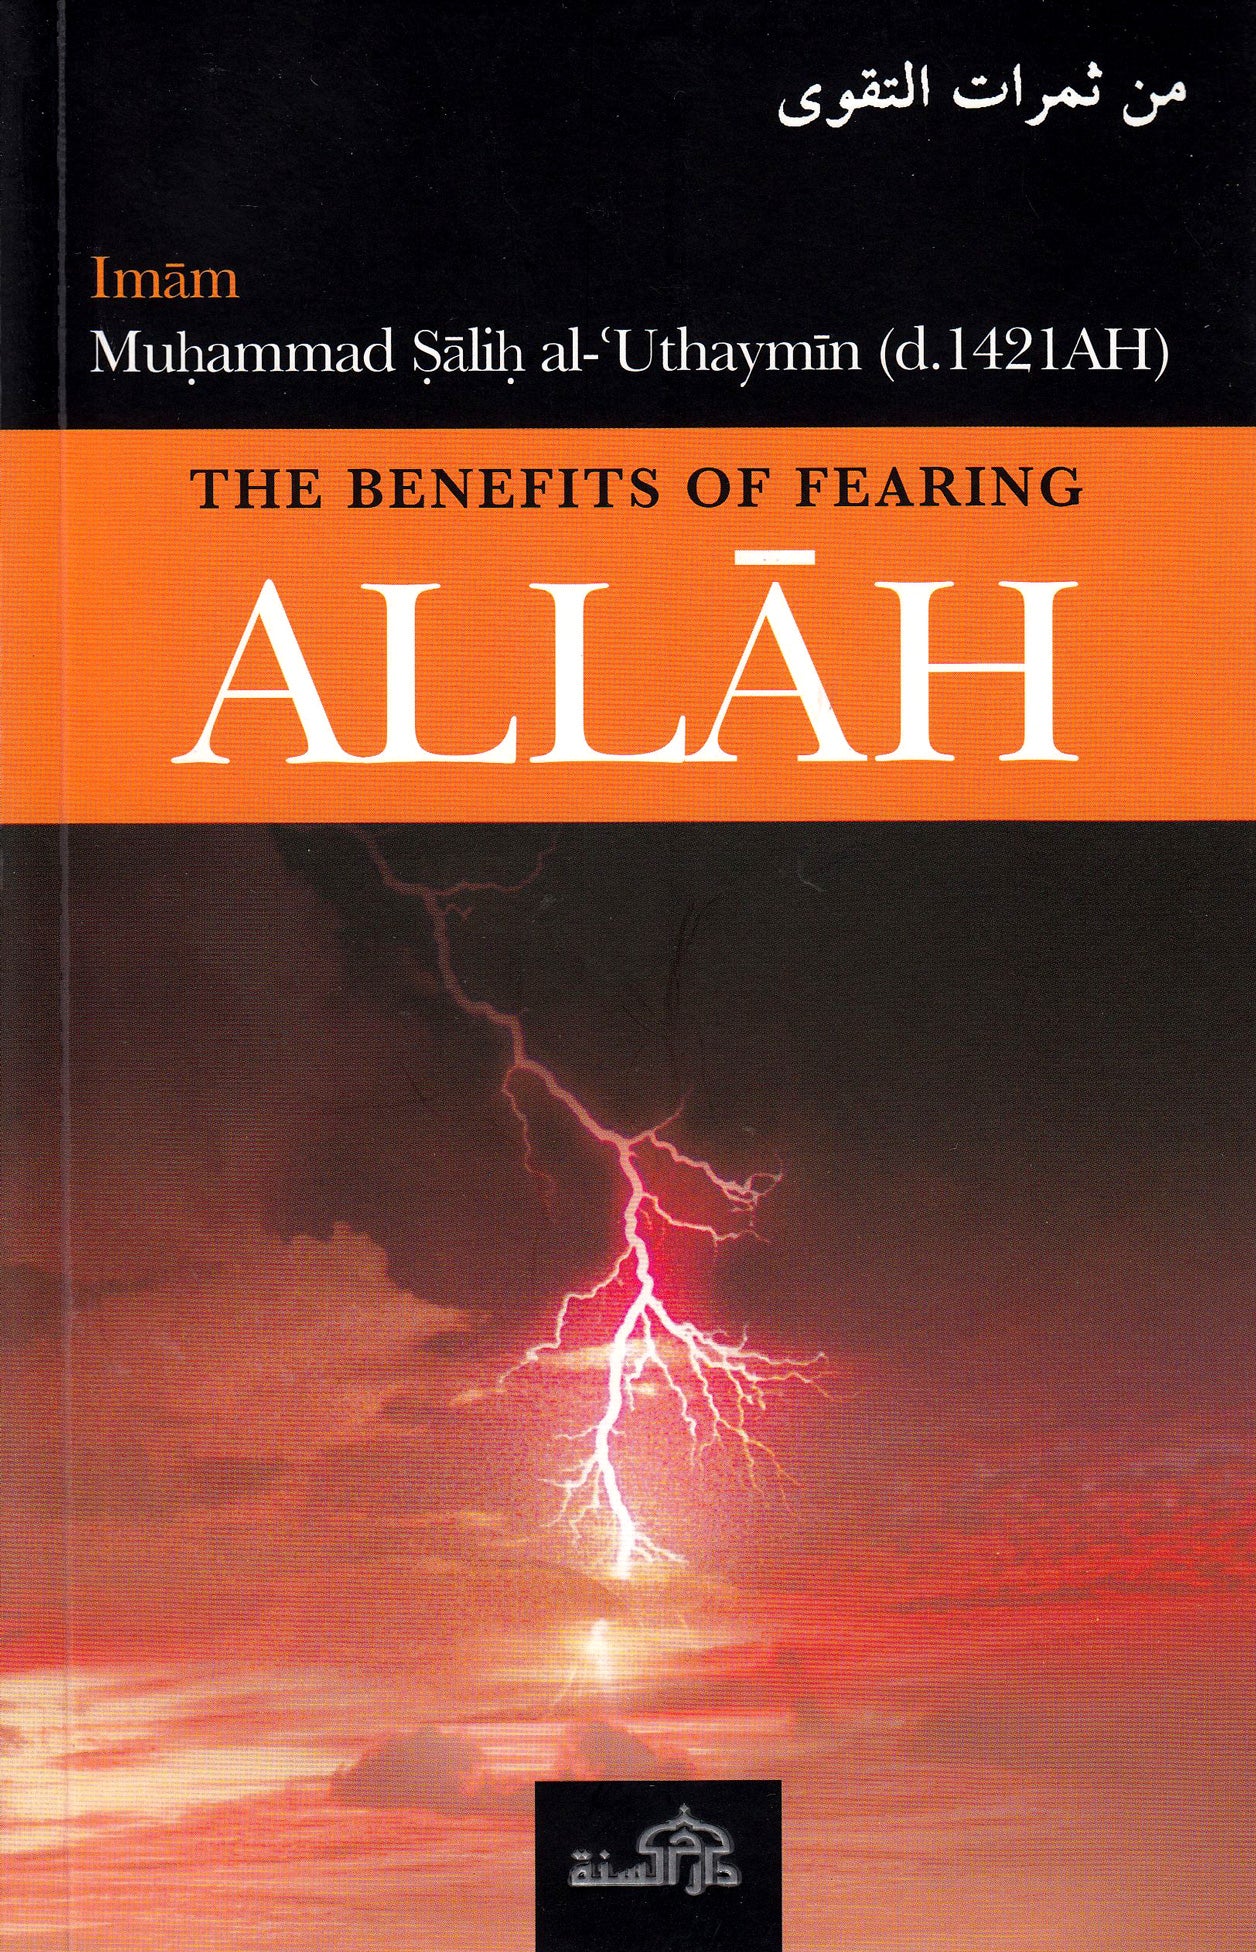 The Benefits of Fearing Allah